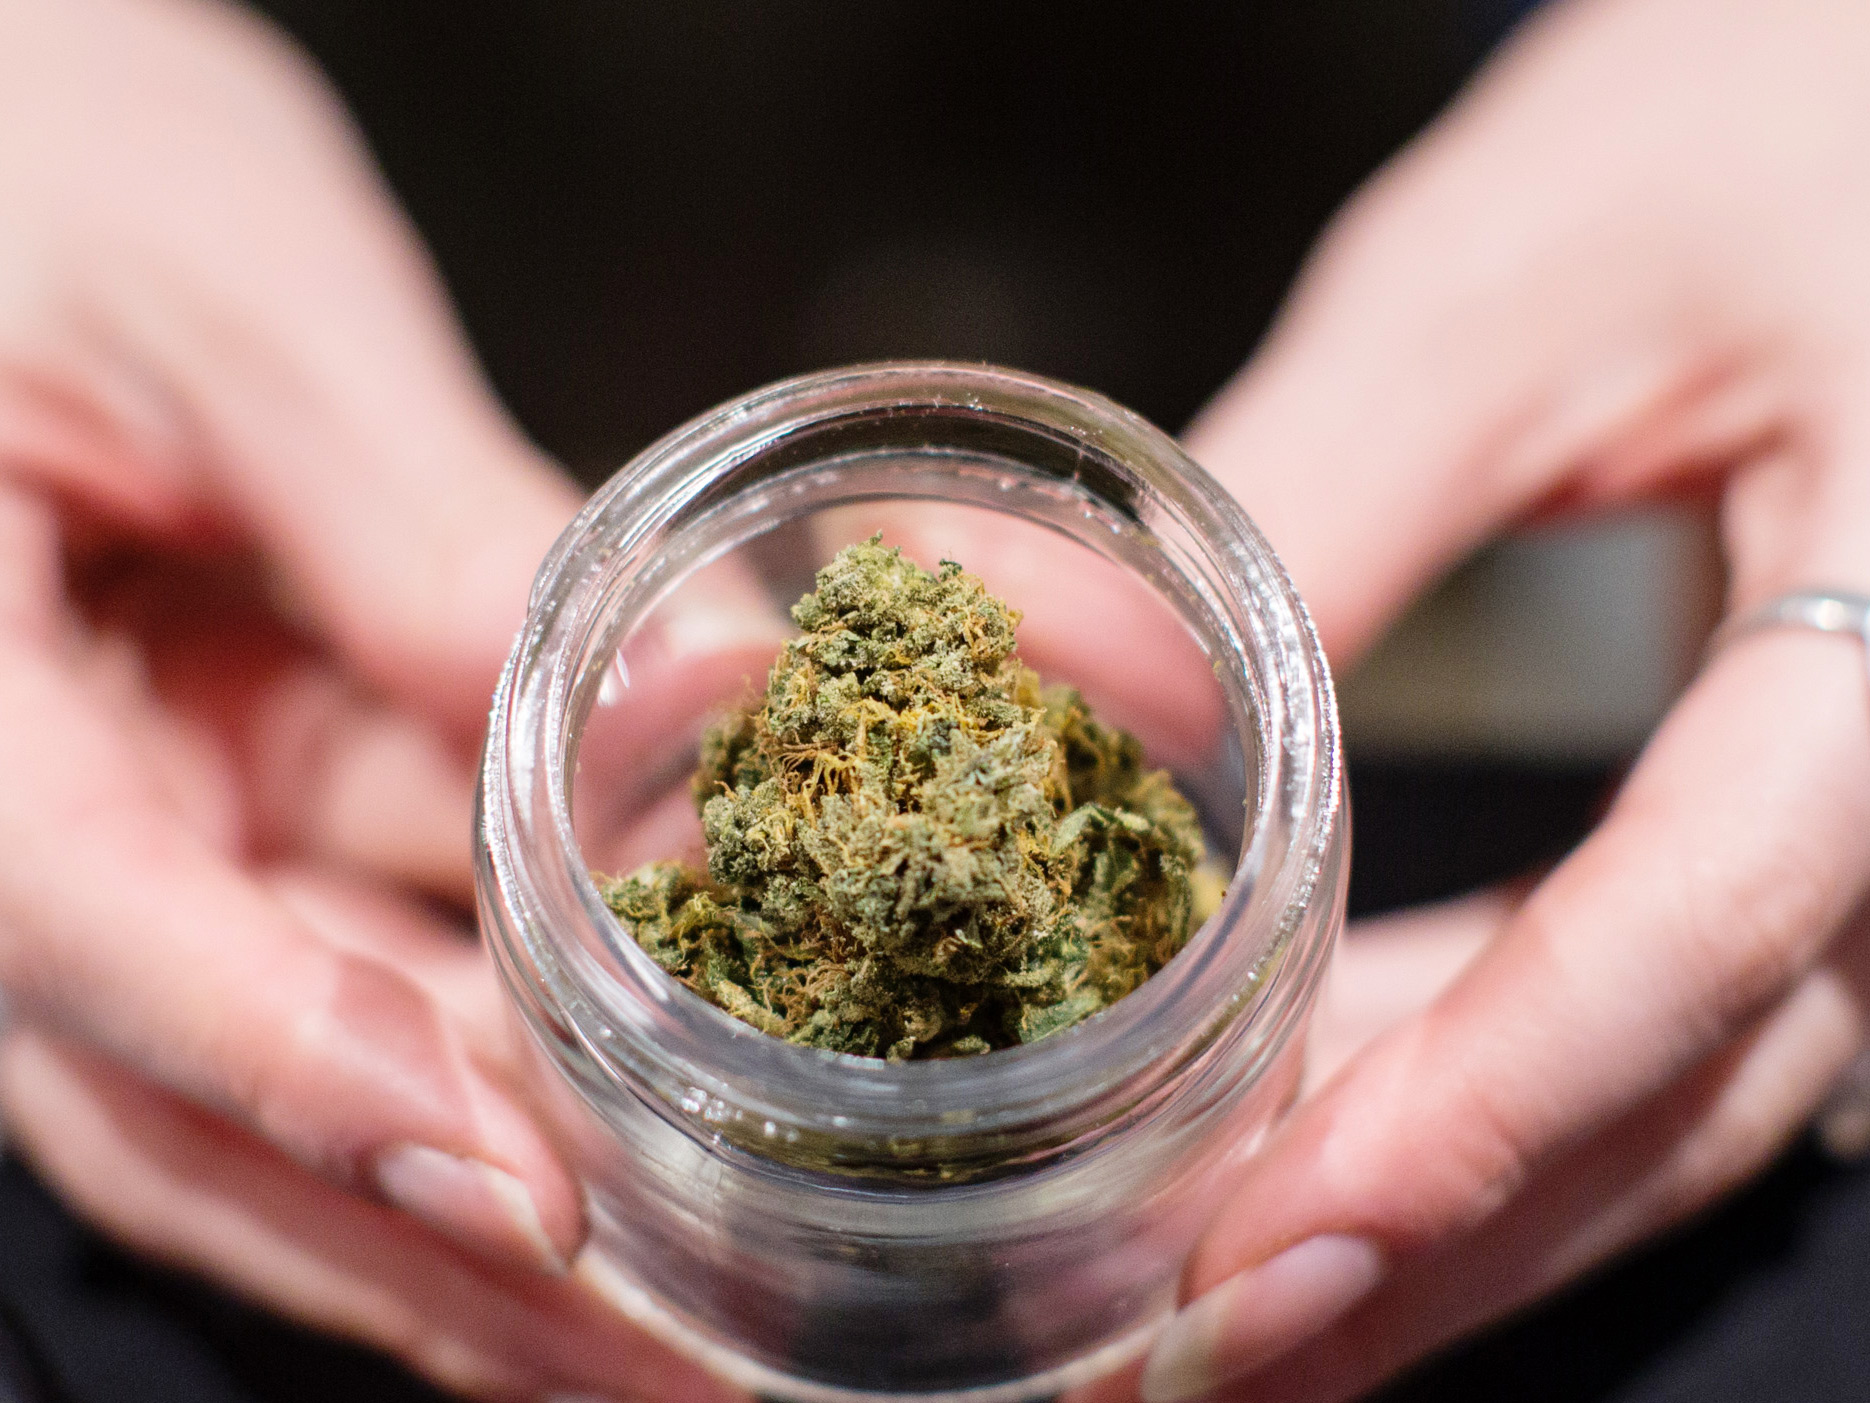 With $800-An-Ounce Bud, Pot Artisans Try To Stick It To The Man